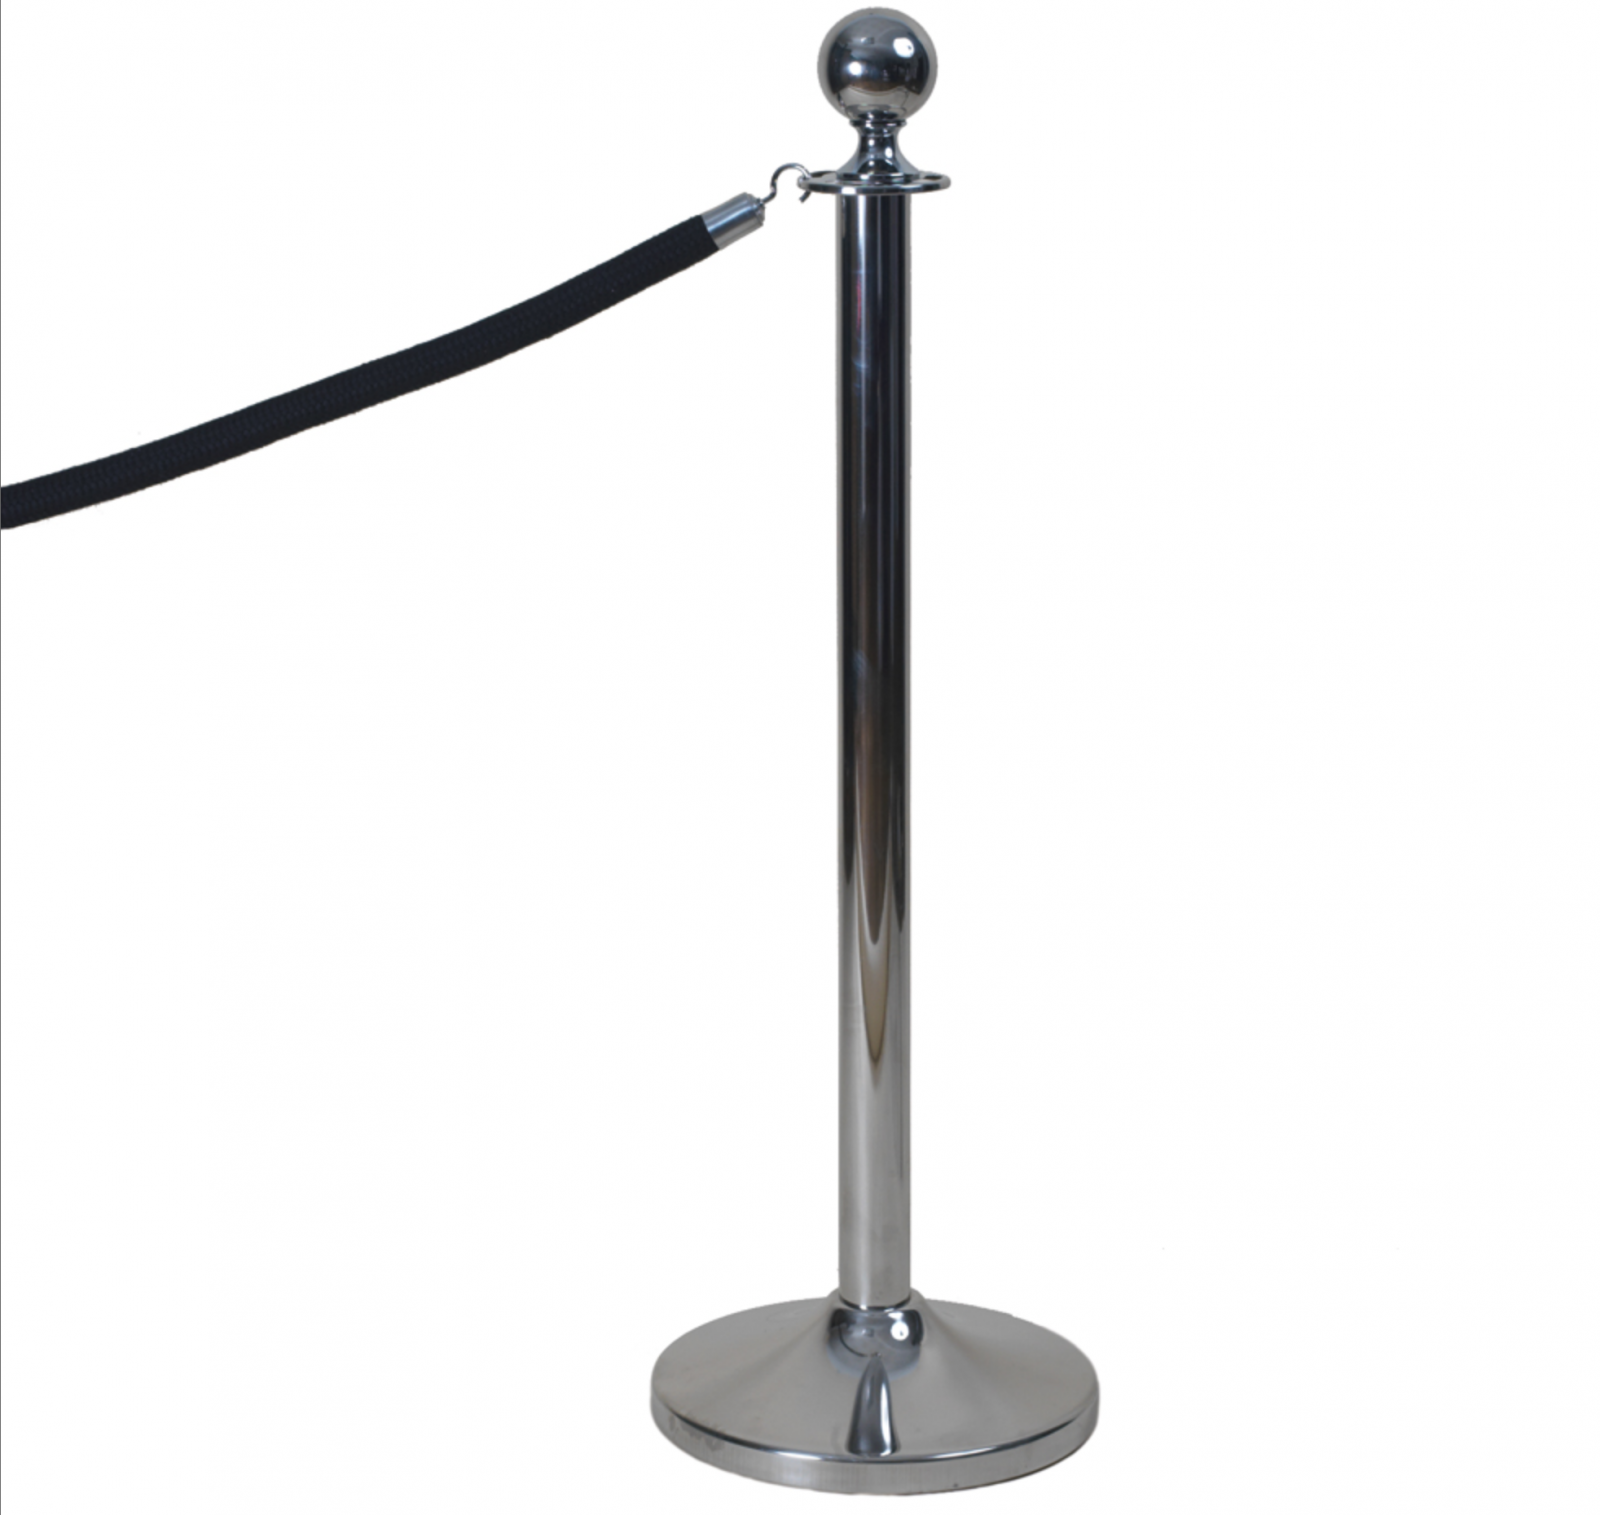 Rental of guide post chrome post and black cord